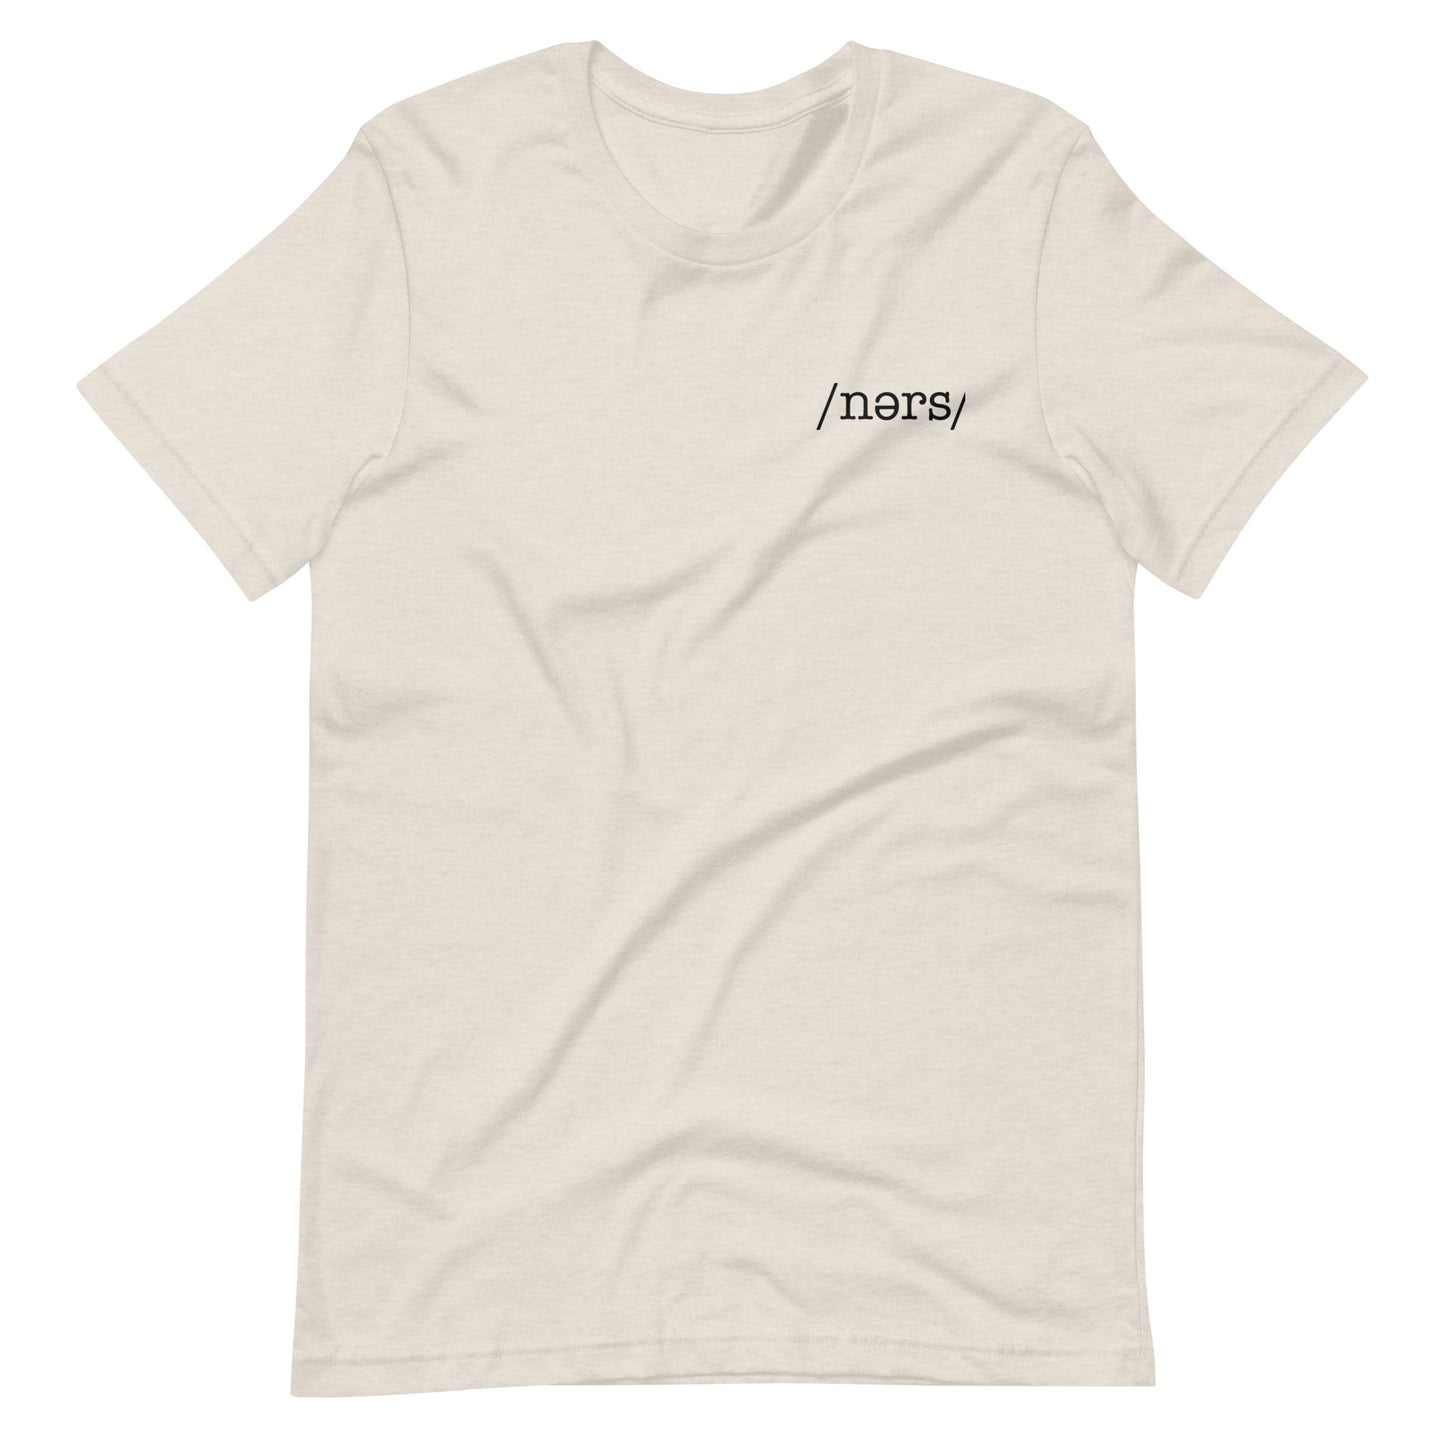 Nurse by Definition SoftStyle Tee